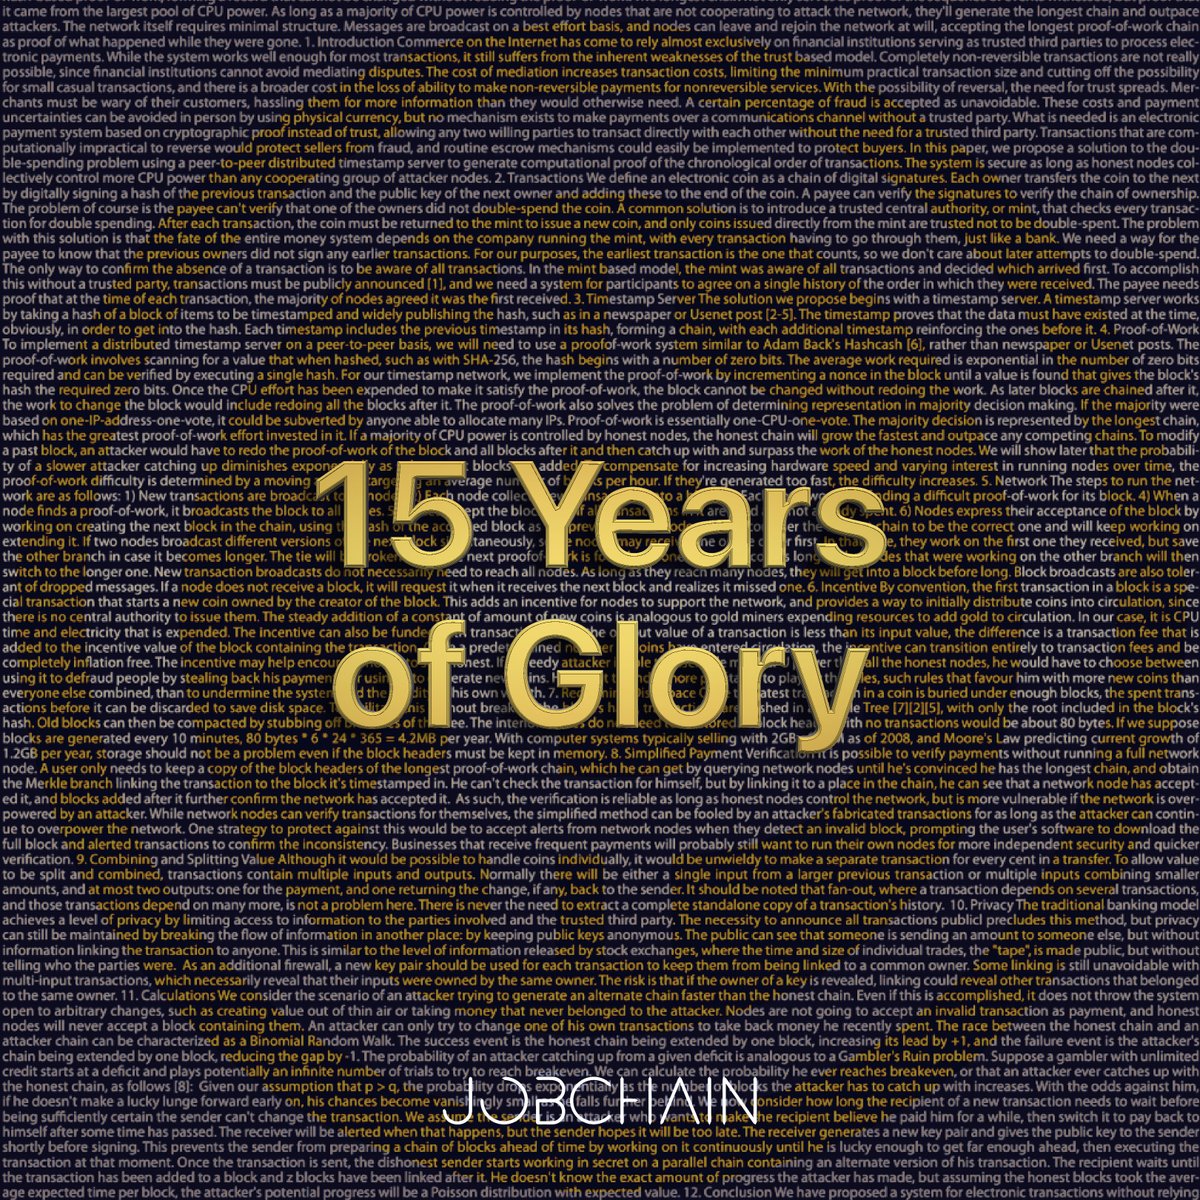 On this day 15 years ago, Satoshi Nakamoto released a document that had a profound impact on numerous individuals and transformed the worldwide financial arena. Cheers to #Bitcoin Whitepaper Anniversary! ₿ #Crypto #Jobchain